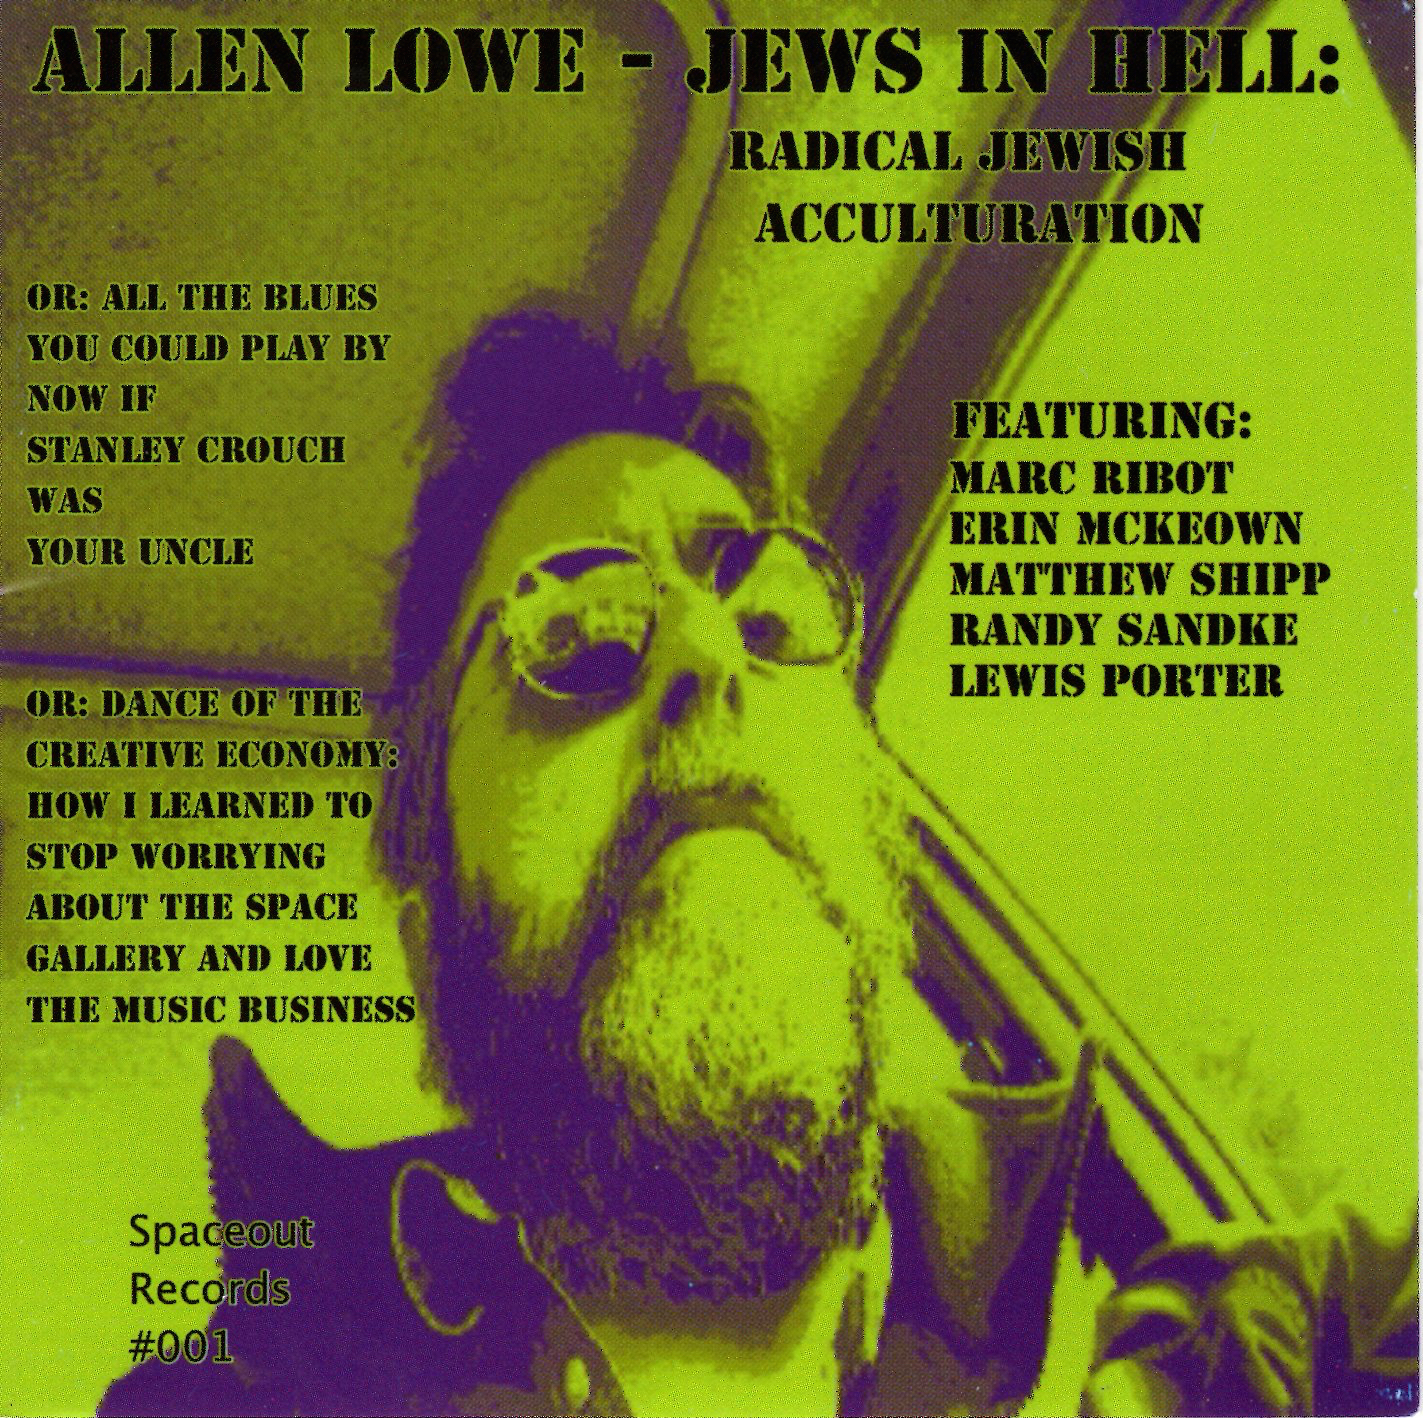 Jews in Hell: Radical Jewish Acculturation